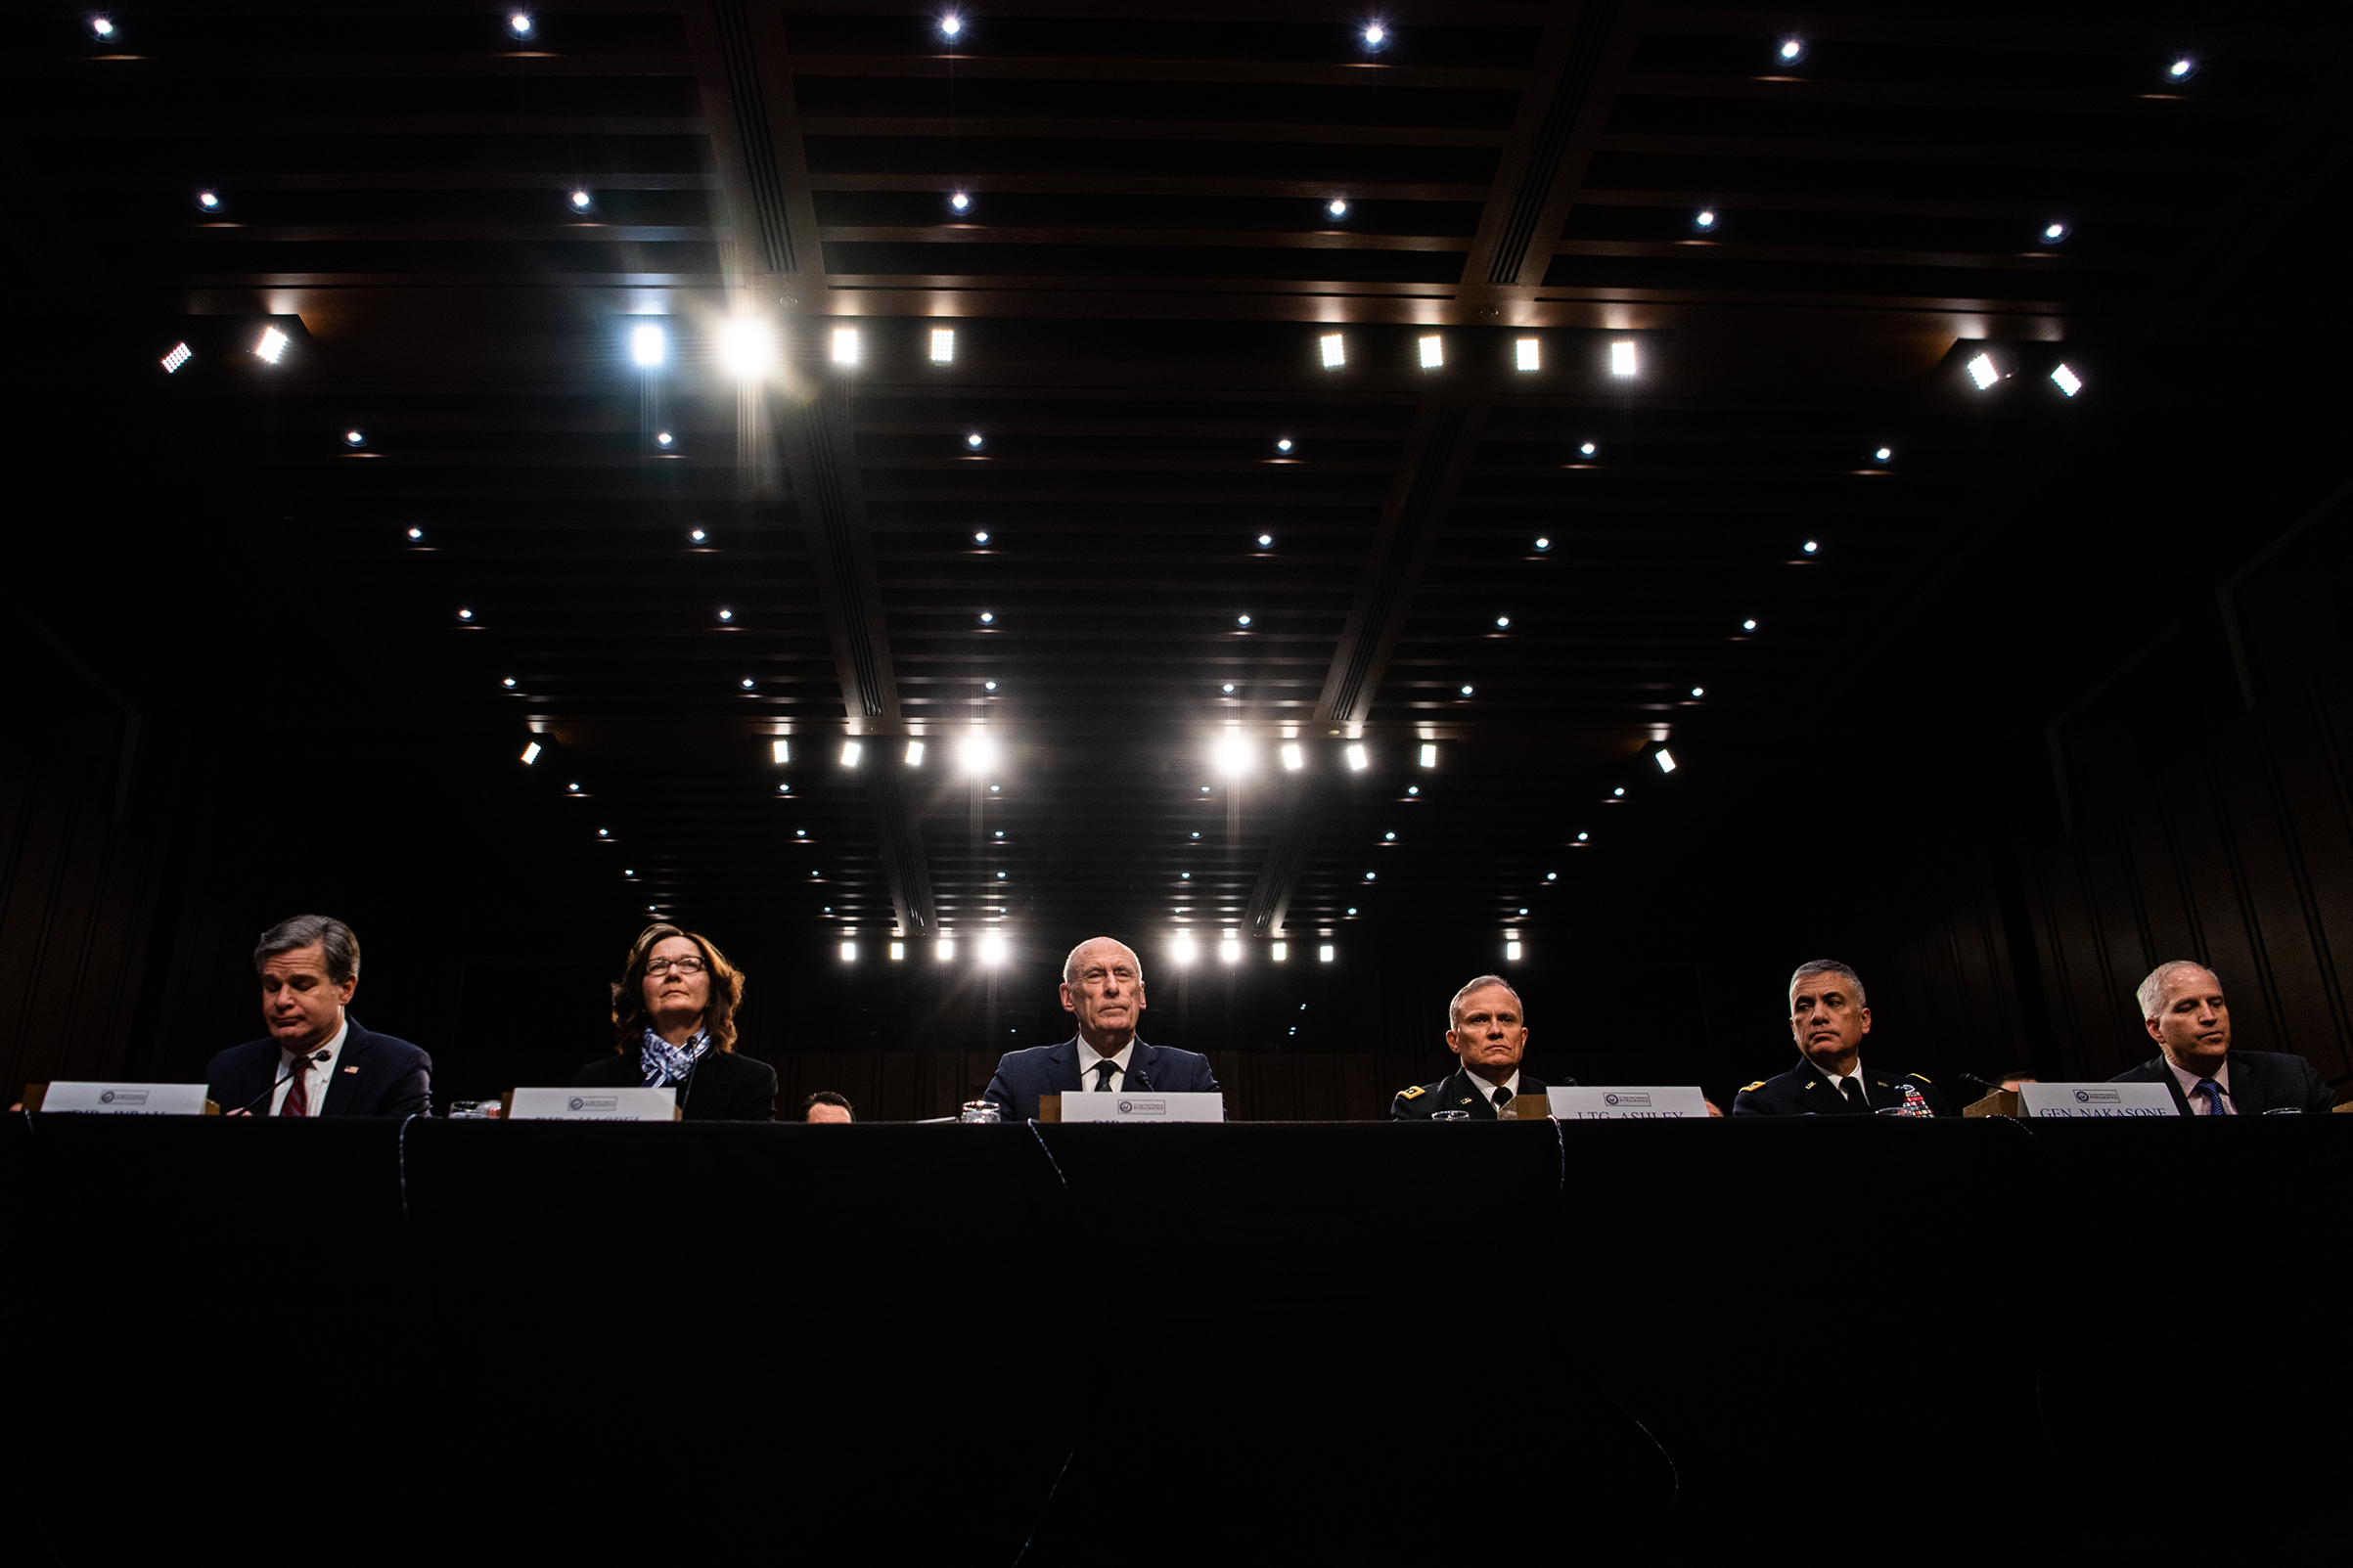 From left, FBI Director Christopher Wray, CIA Director Gina Haspel, Director of National Intelligence Daniel Coats, Defense Intelligence Agency Director Gen. Robert Ashley, National Security Agency Director Gen. Paul Nakasone and National Geospatial-Intelligence Agency Director Robert Cardillo testify to the Senate Intelligence Committee on worldwide threats on Jan. 29, 2019. (Salwan Georges—The Washington Post/Getty Images)